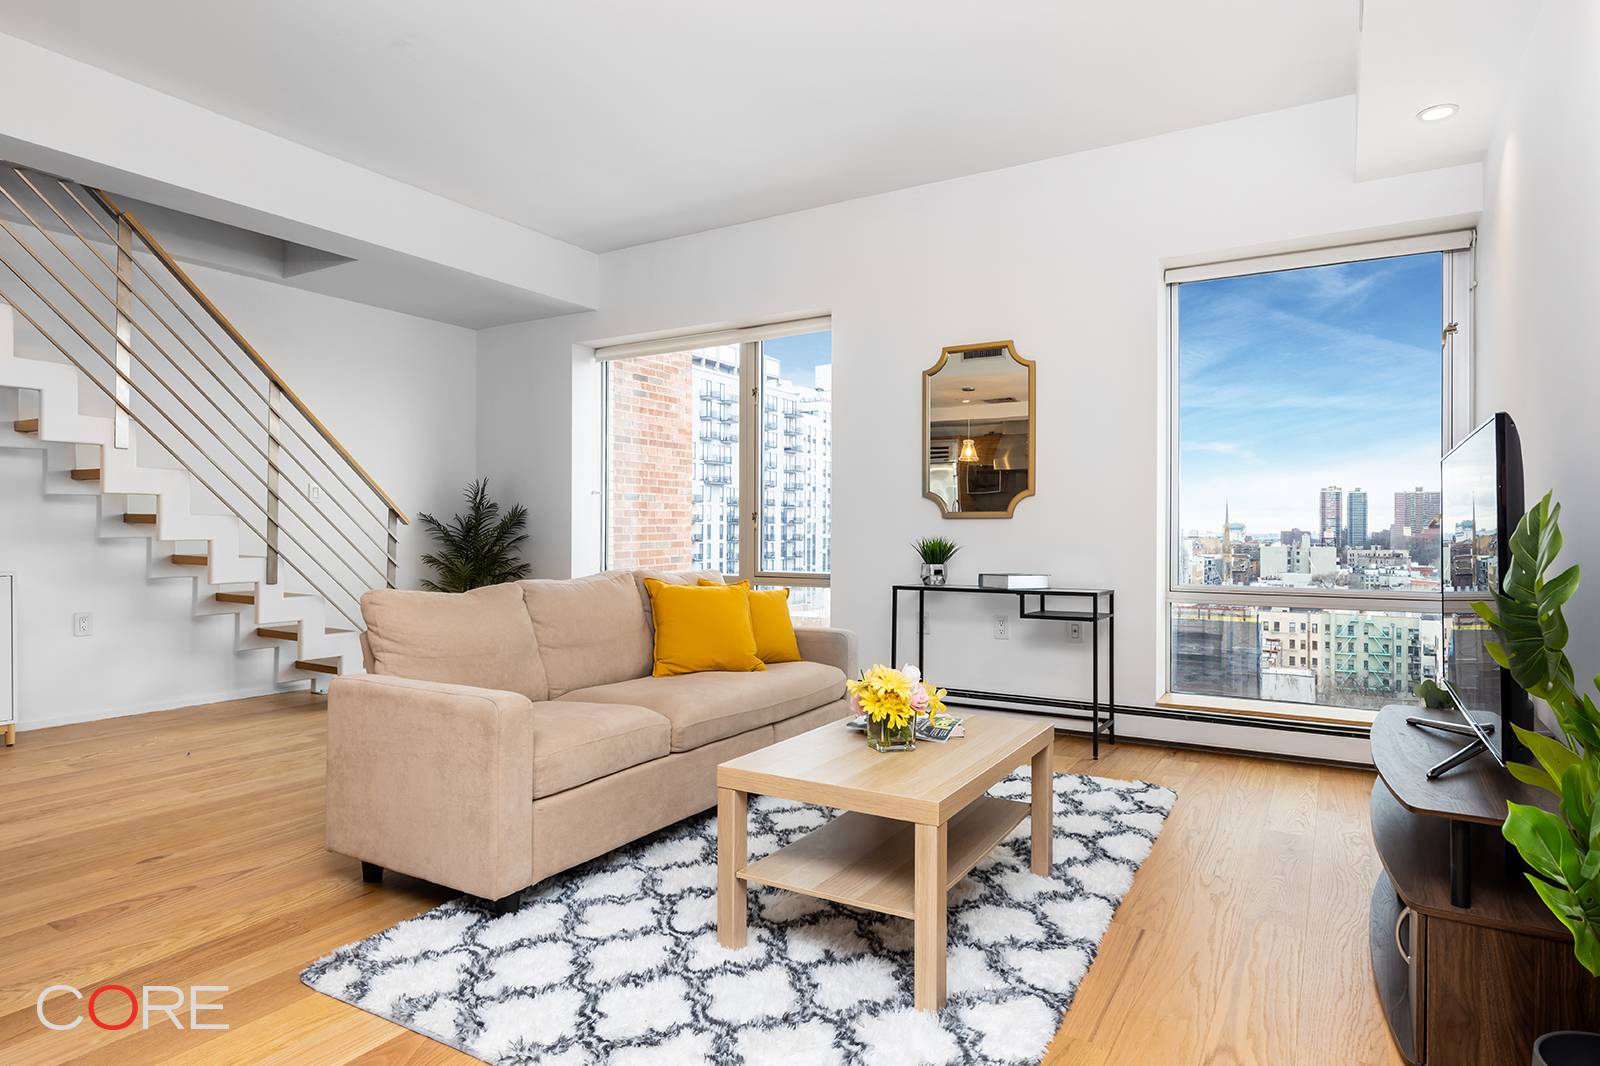 With over 2, 900 square feet of interior and private outdoor space, this three bedroom, two and a half bath penthouse home is your fully equipped urban retreat with its ...